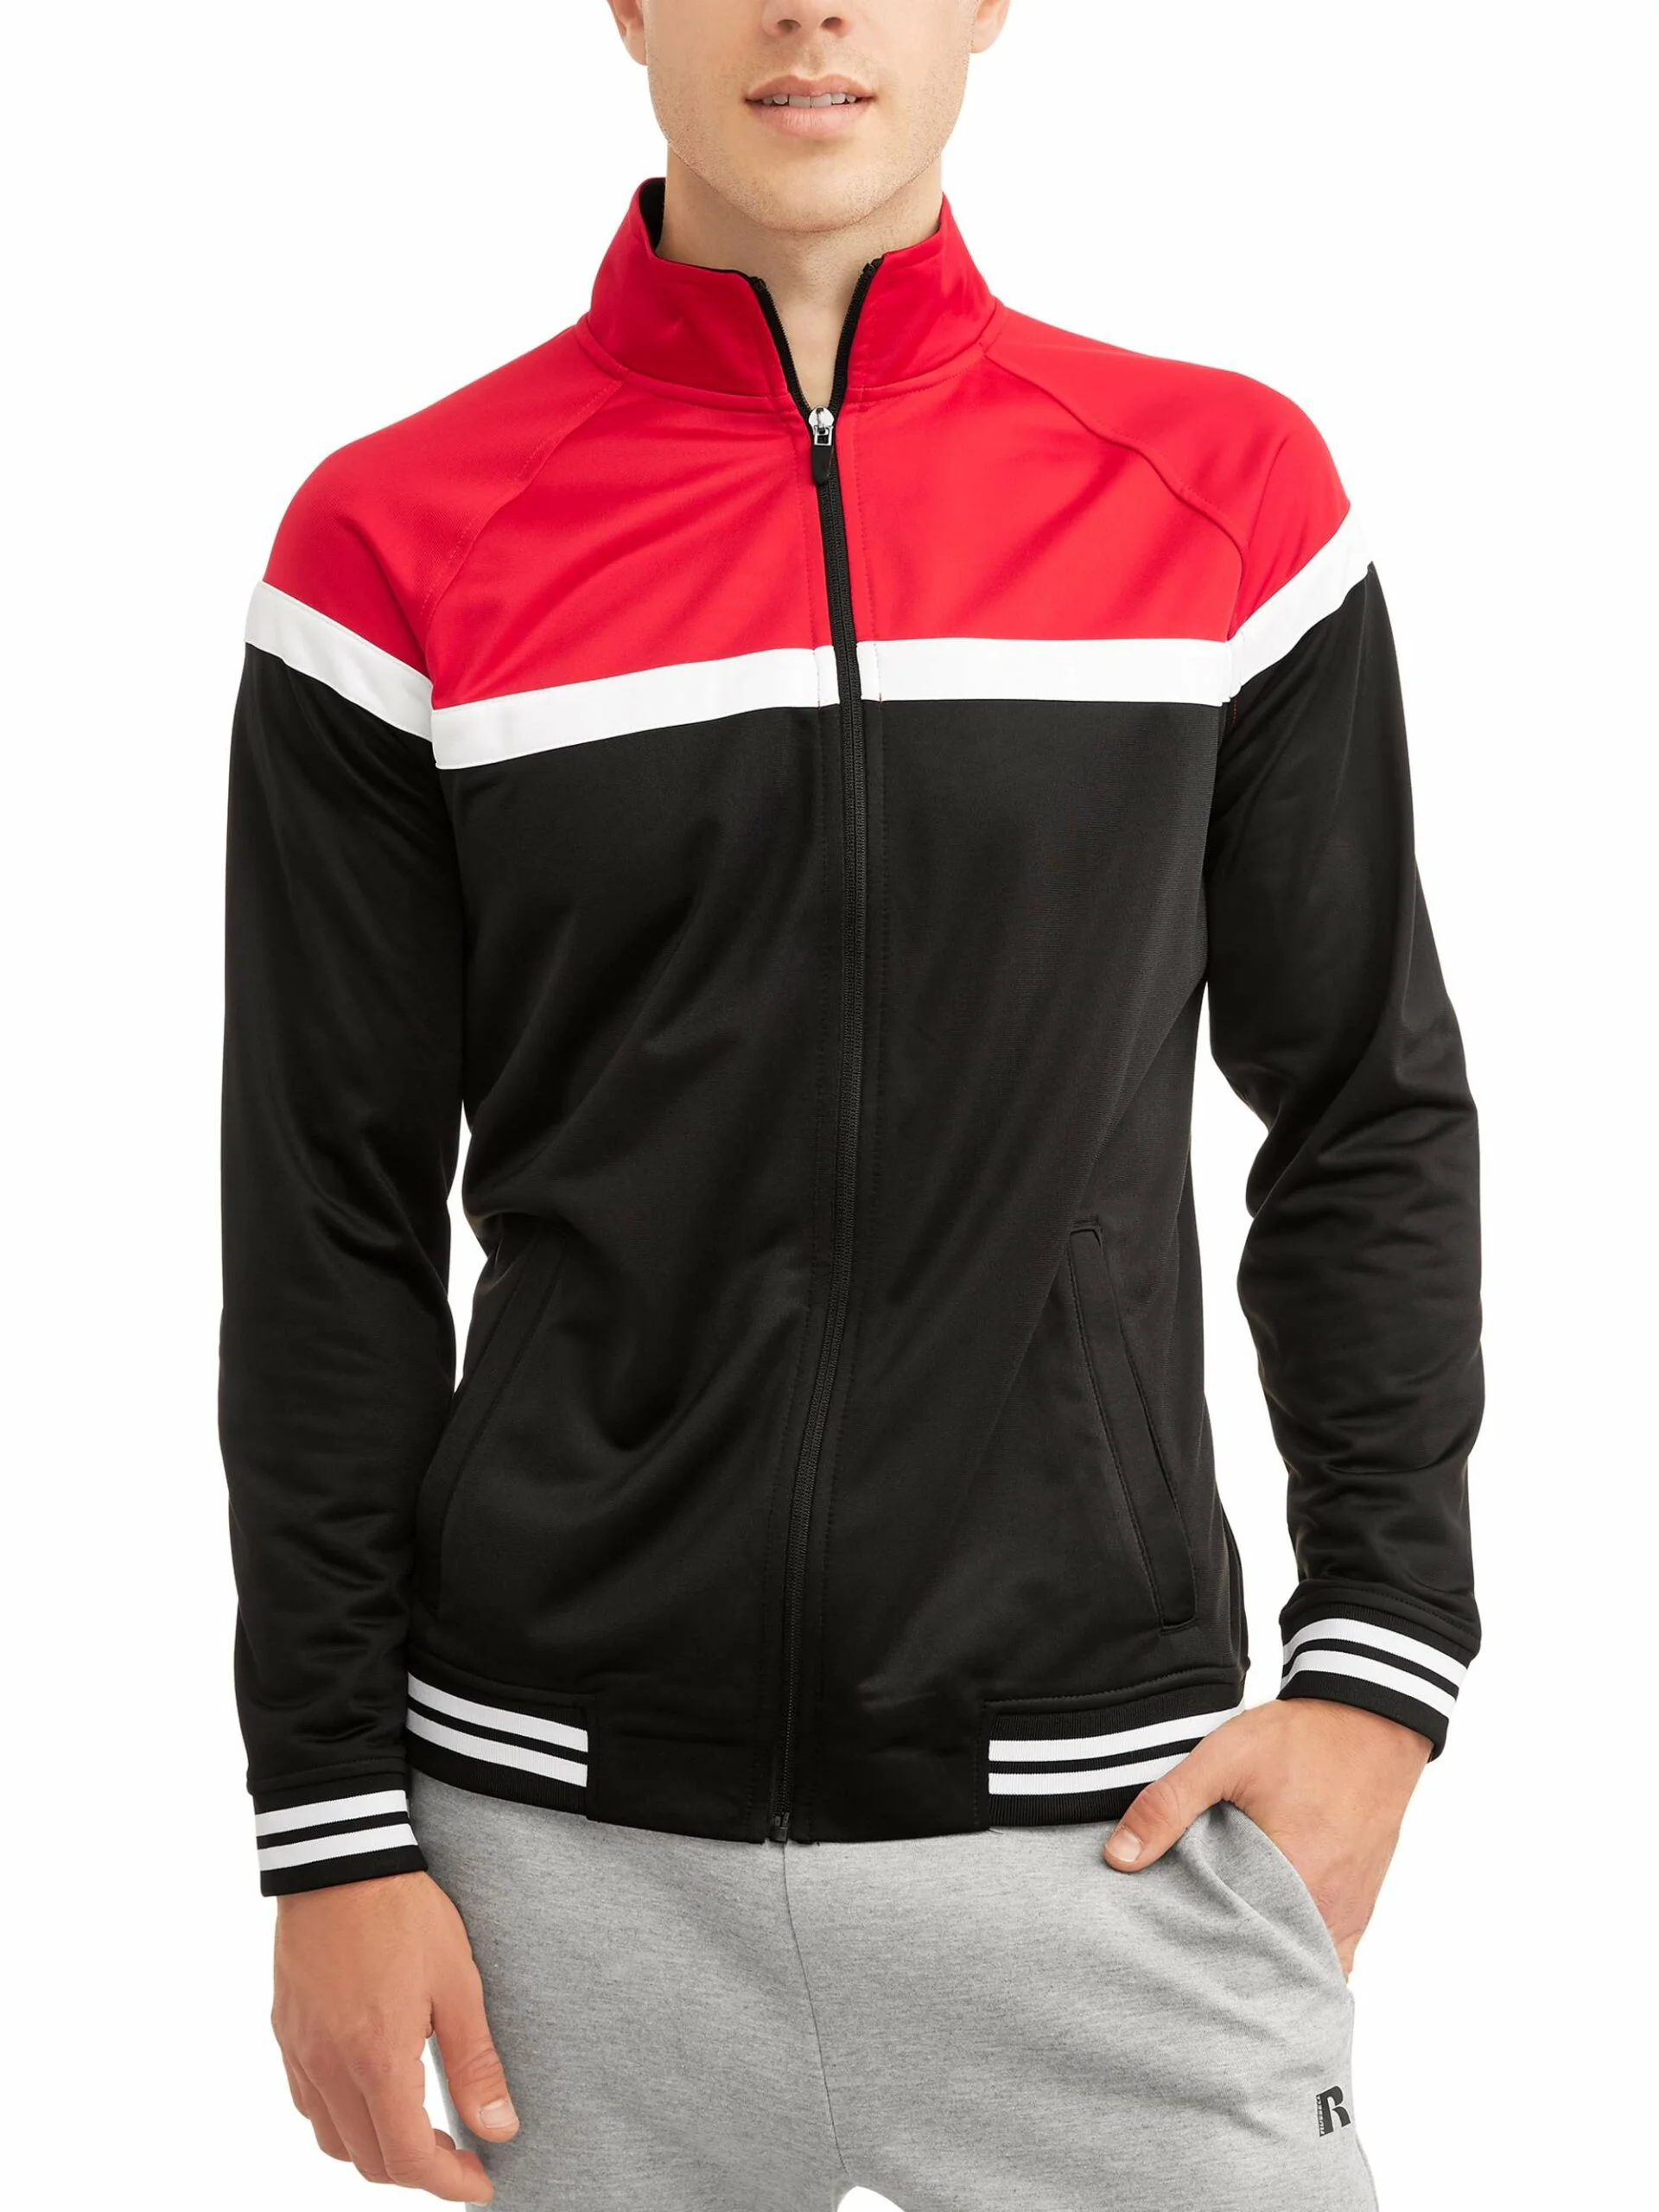 jogging suits - Bangladesh Factory, Suppliers, Manufacturers